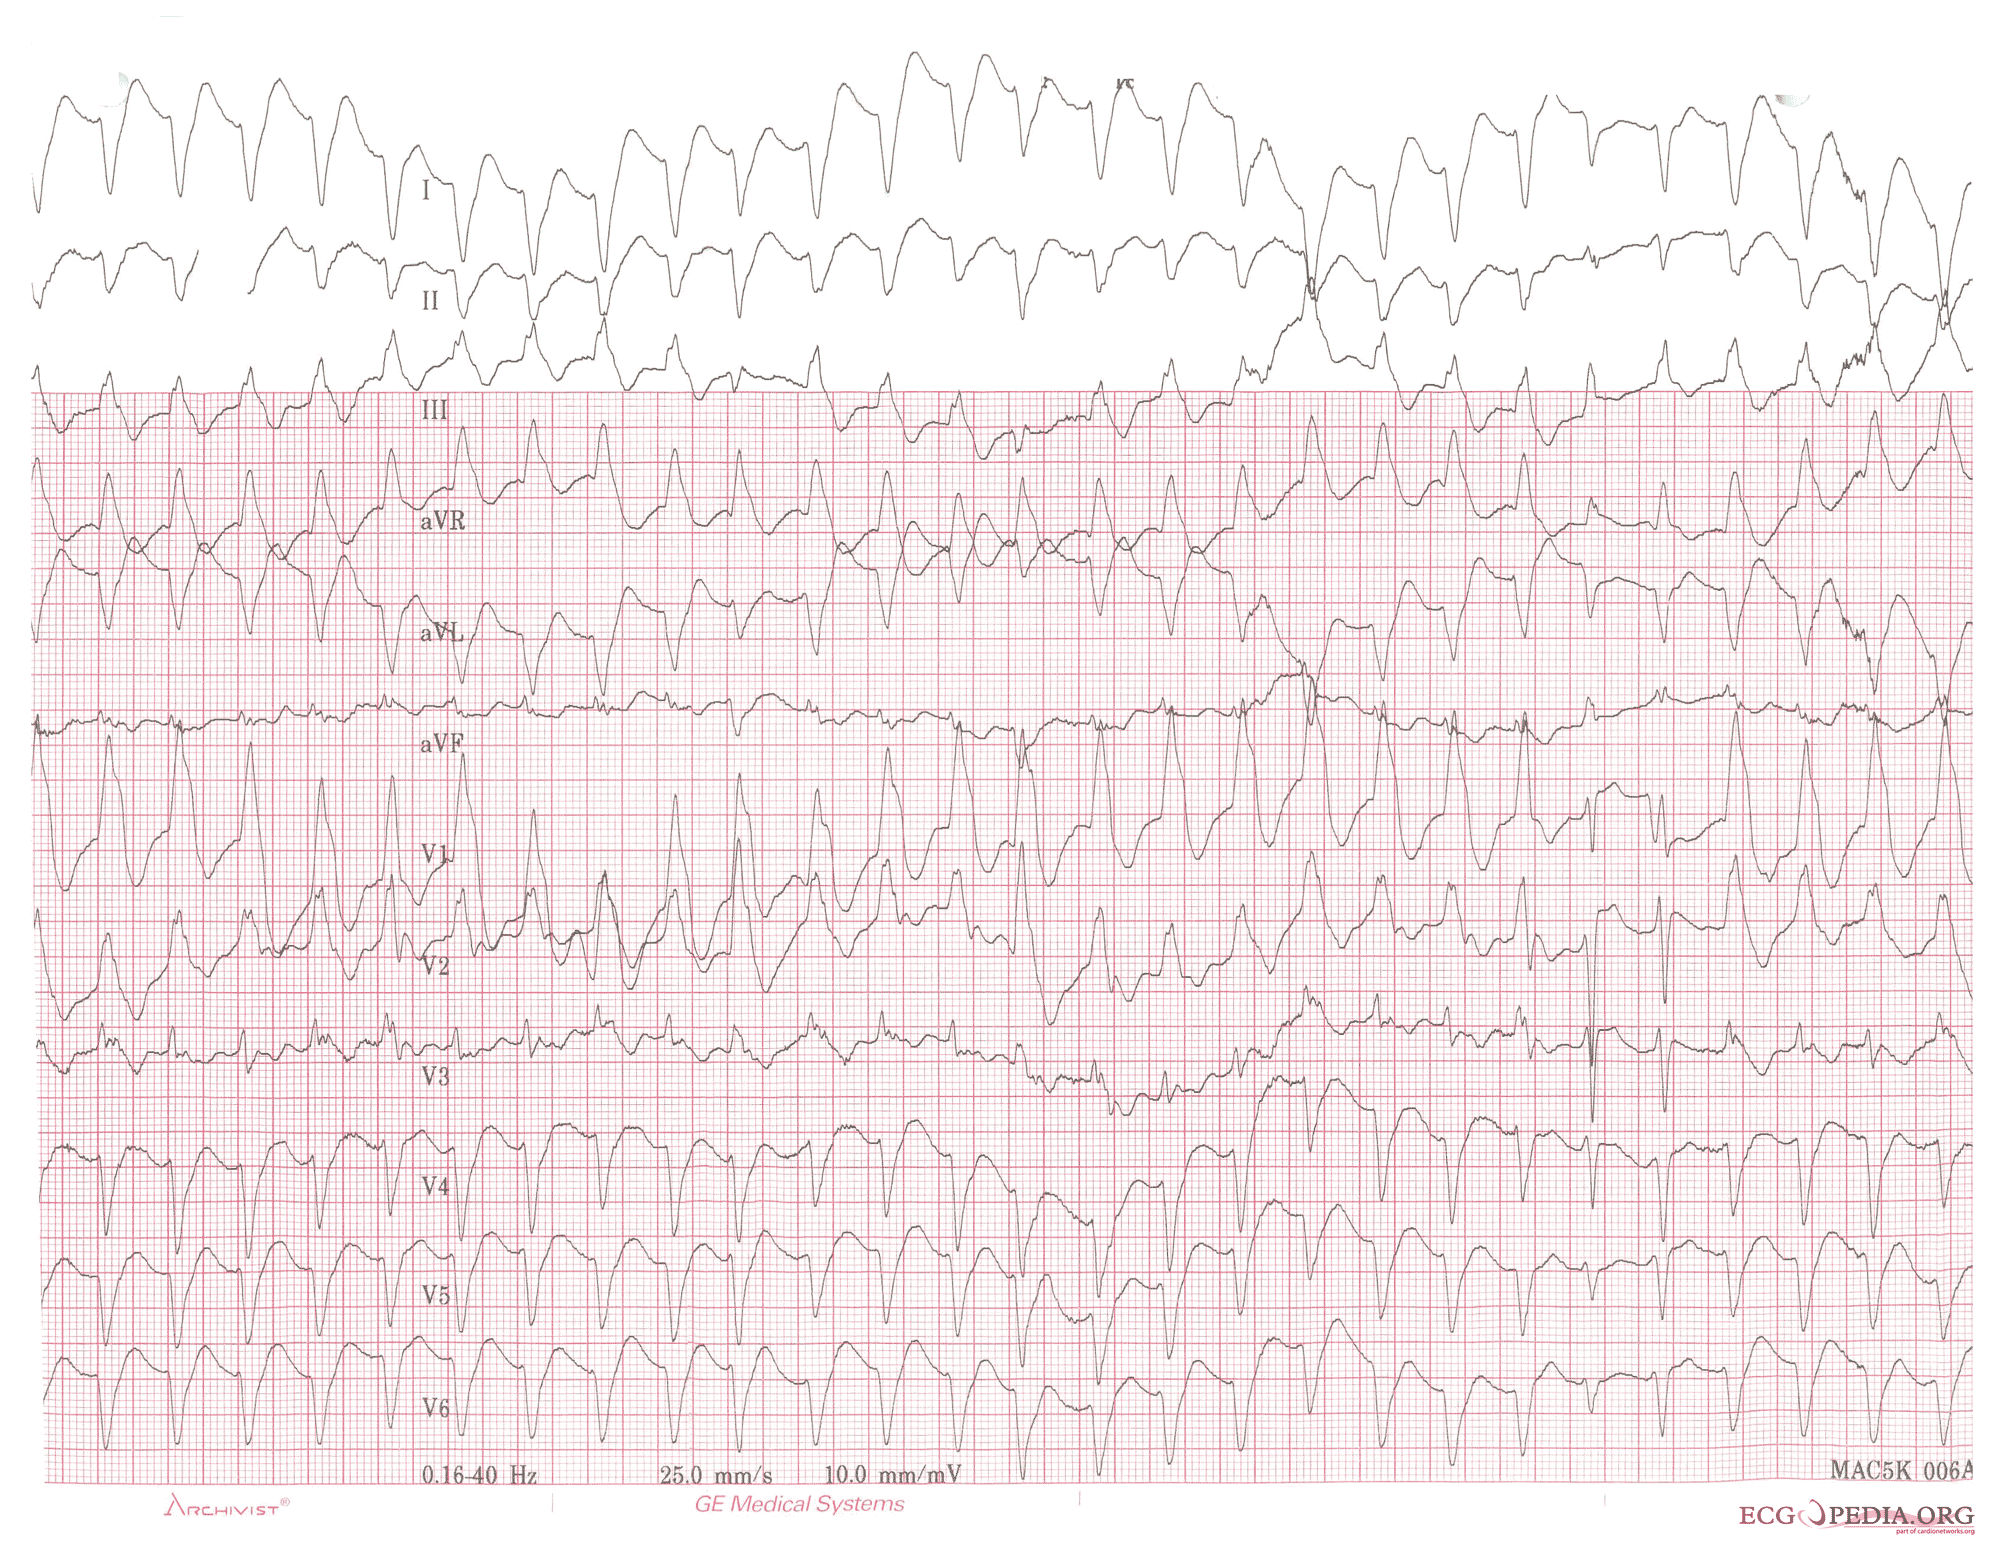 Ventricular tachycardia of 150 bpm with a right bundle branch block pattern and right heart axis. Note the 5th and 6th complex from the right side. These are fusion complexes.